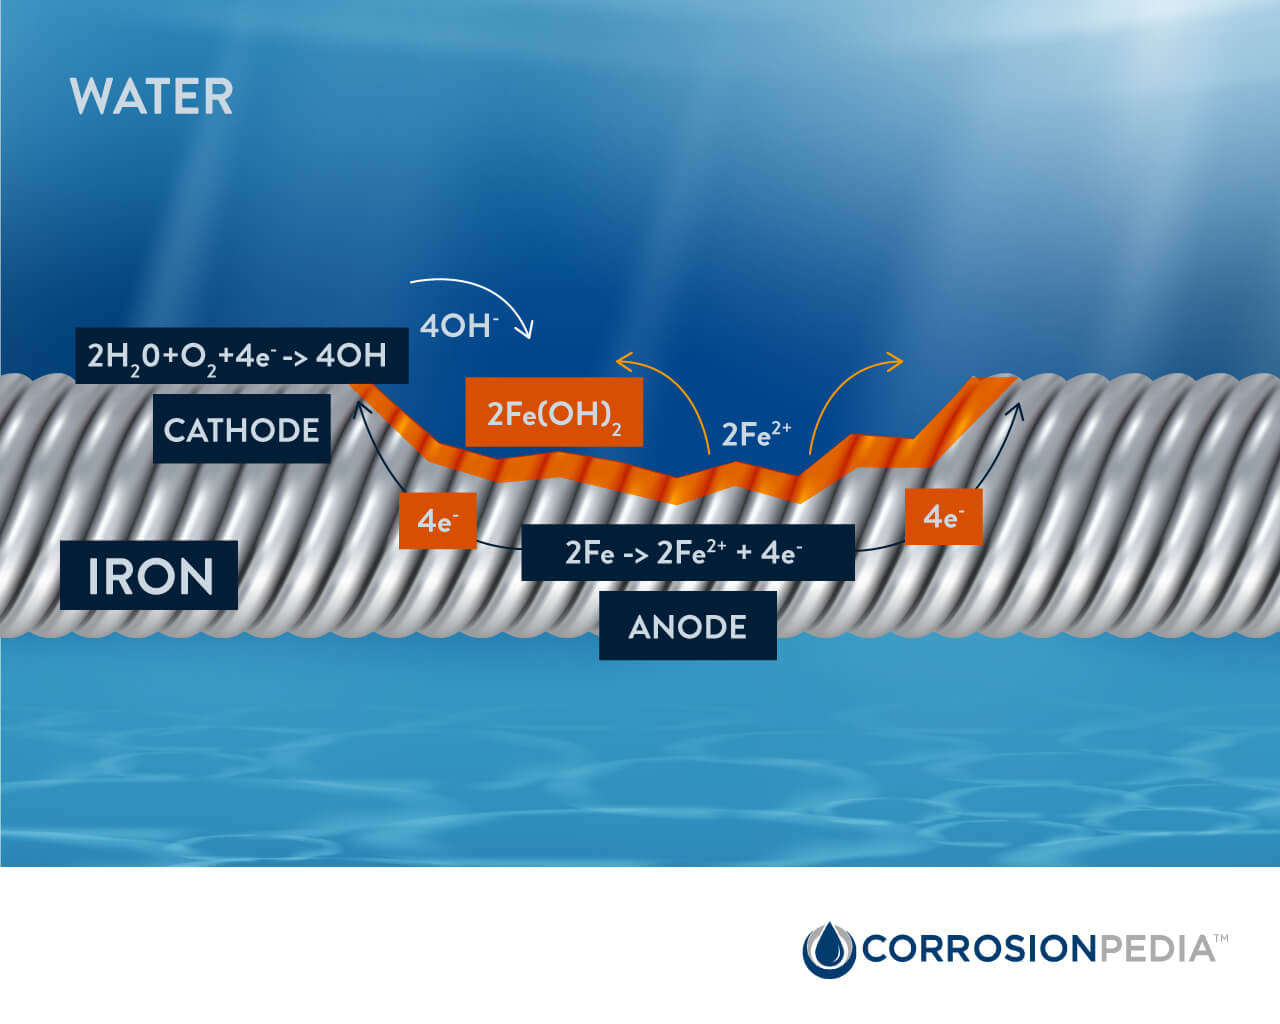 Chemical reactions during rebar corrosion.